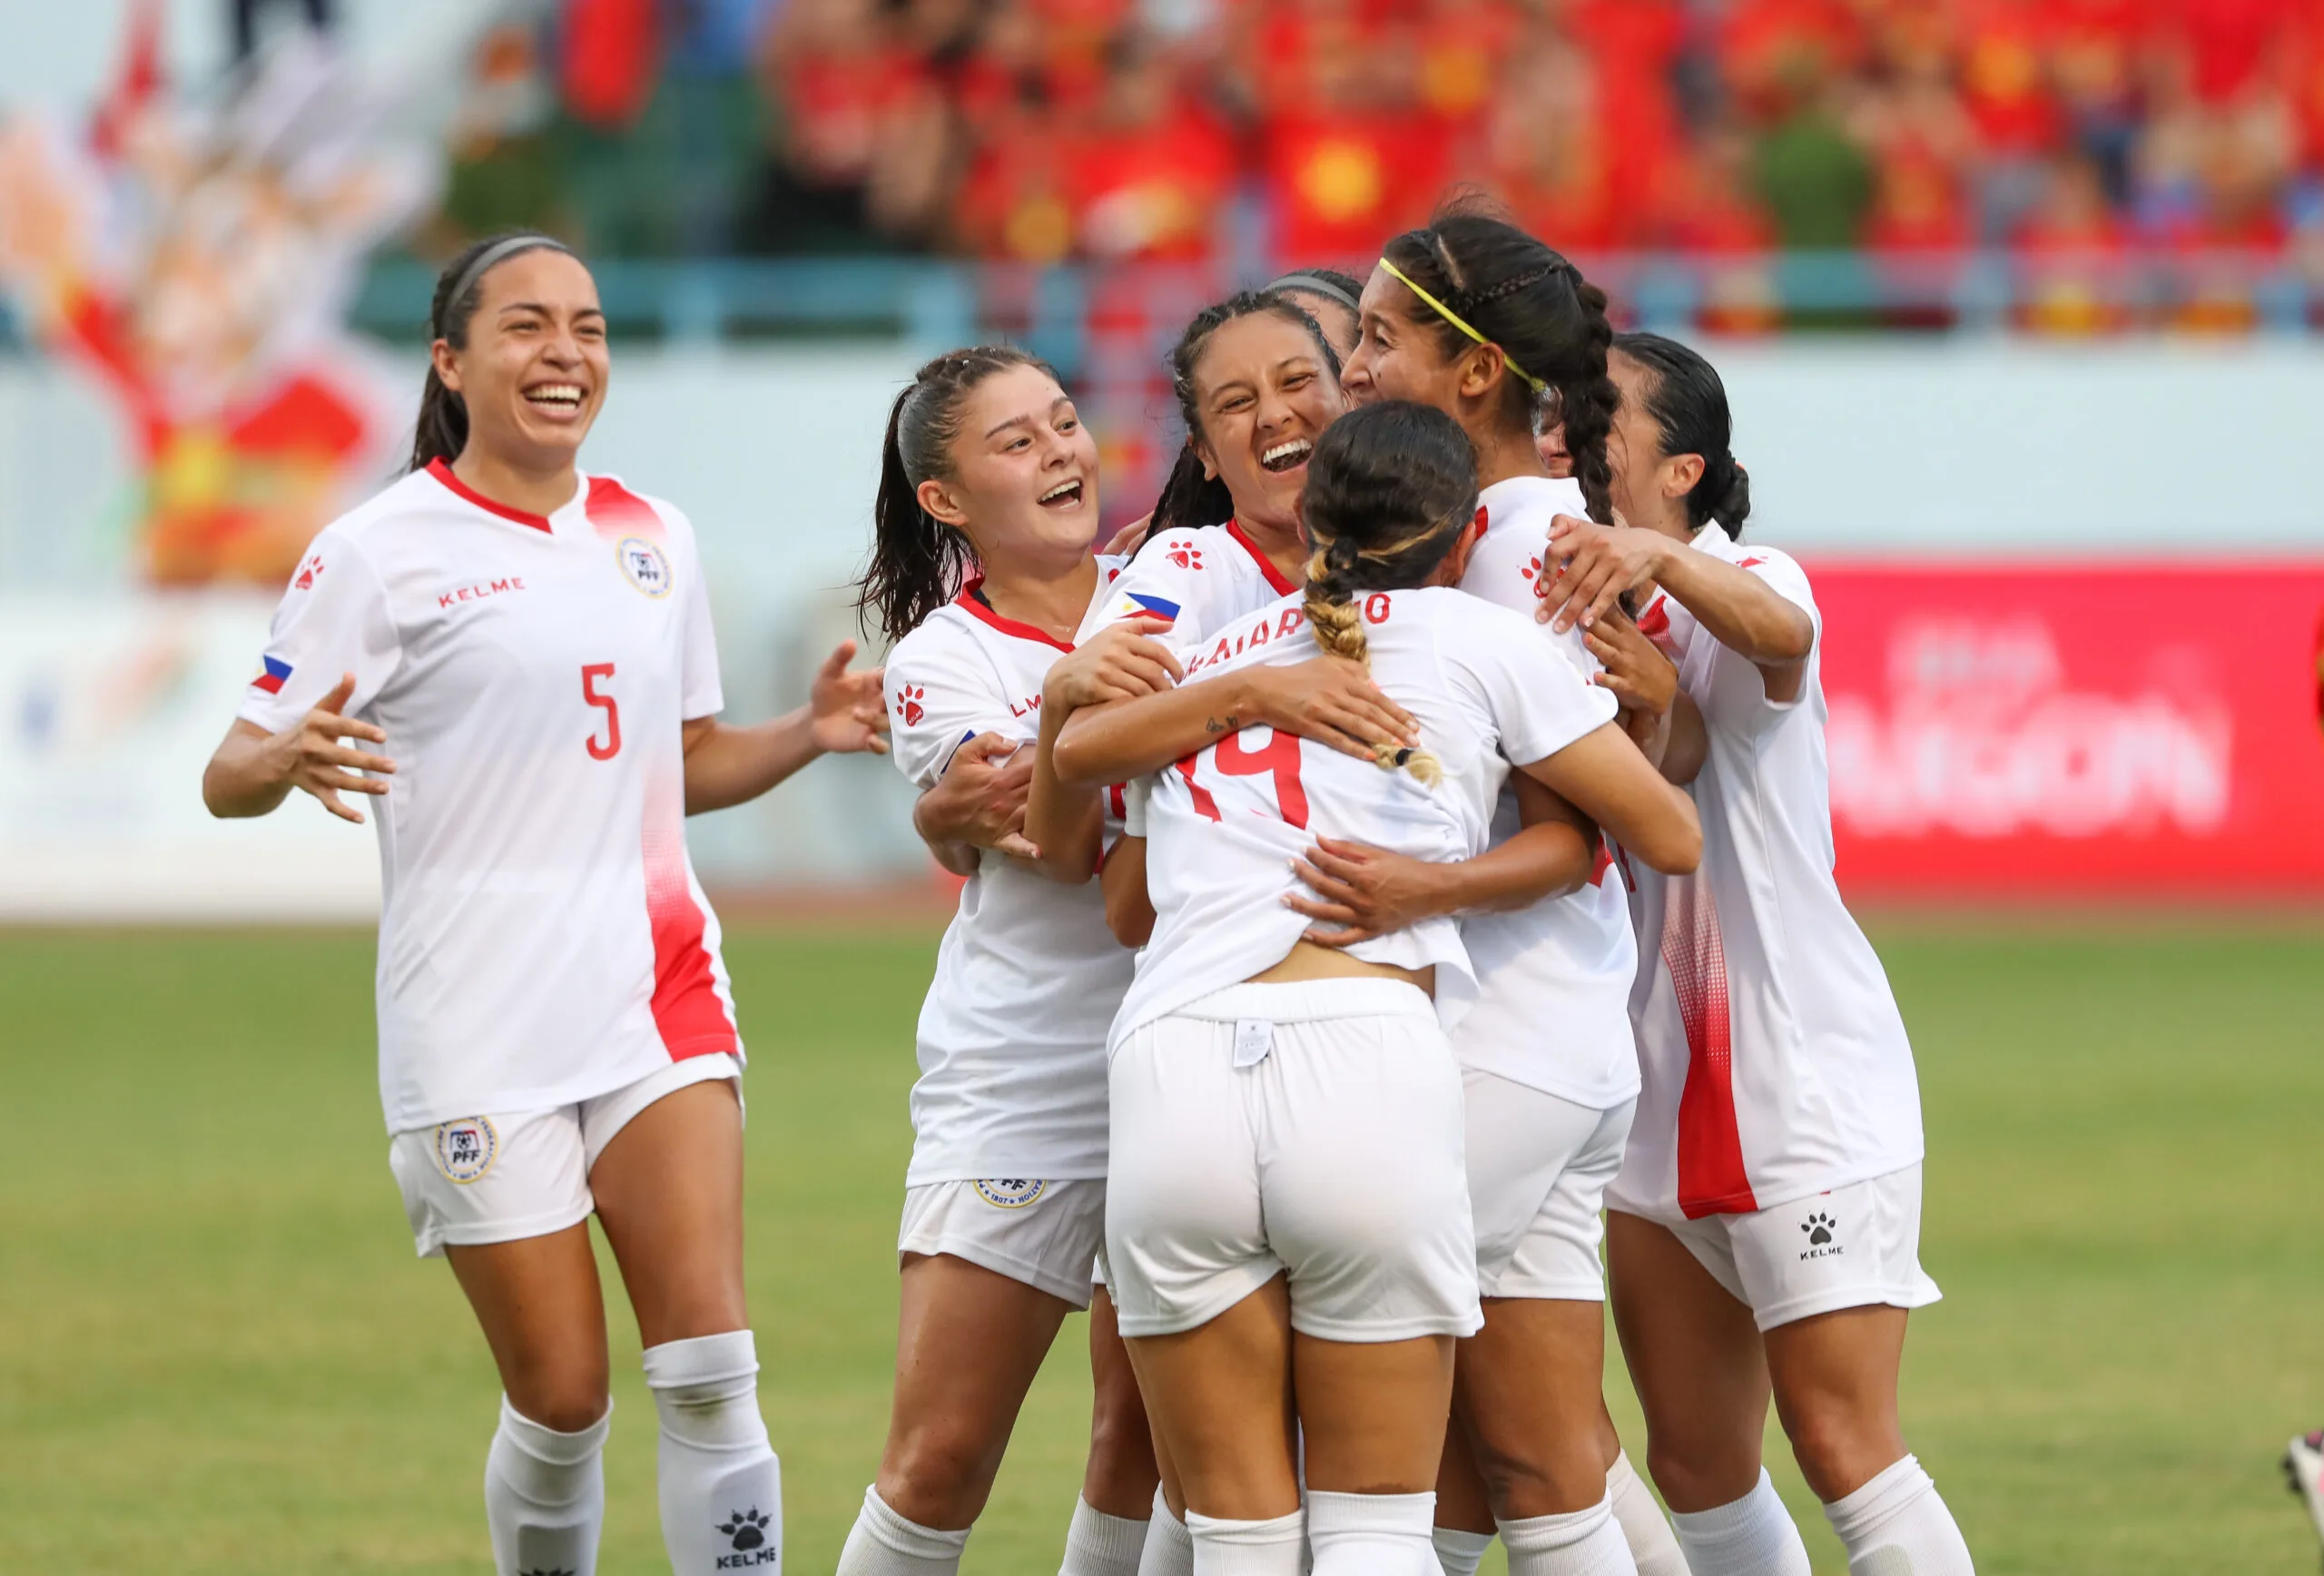 New Zealand Women vs Philippines Women – Match preview, live stream, kick-off time, prediction, team news, lineups
